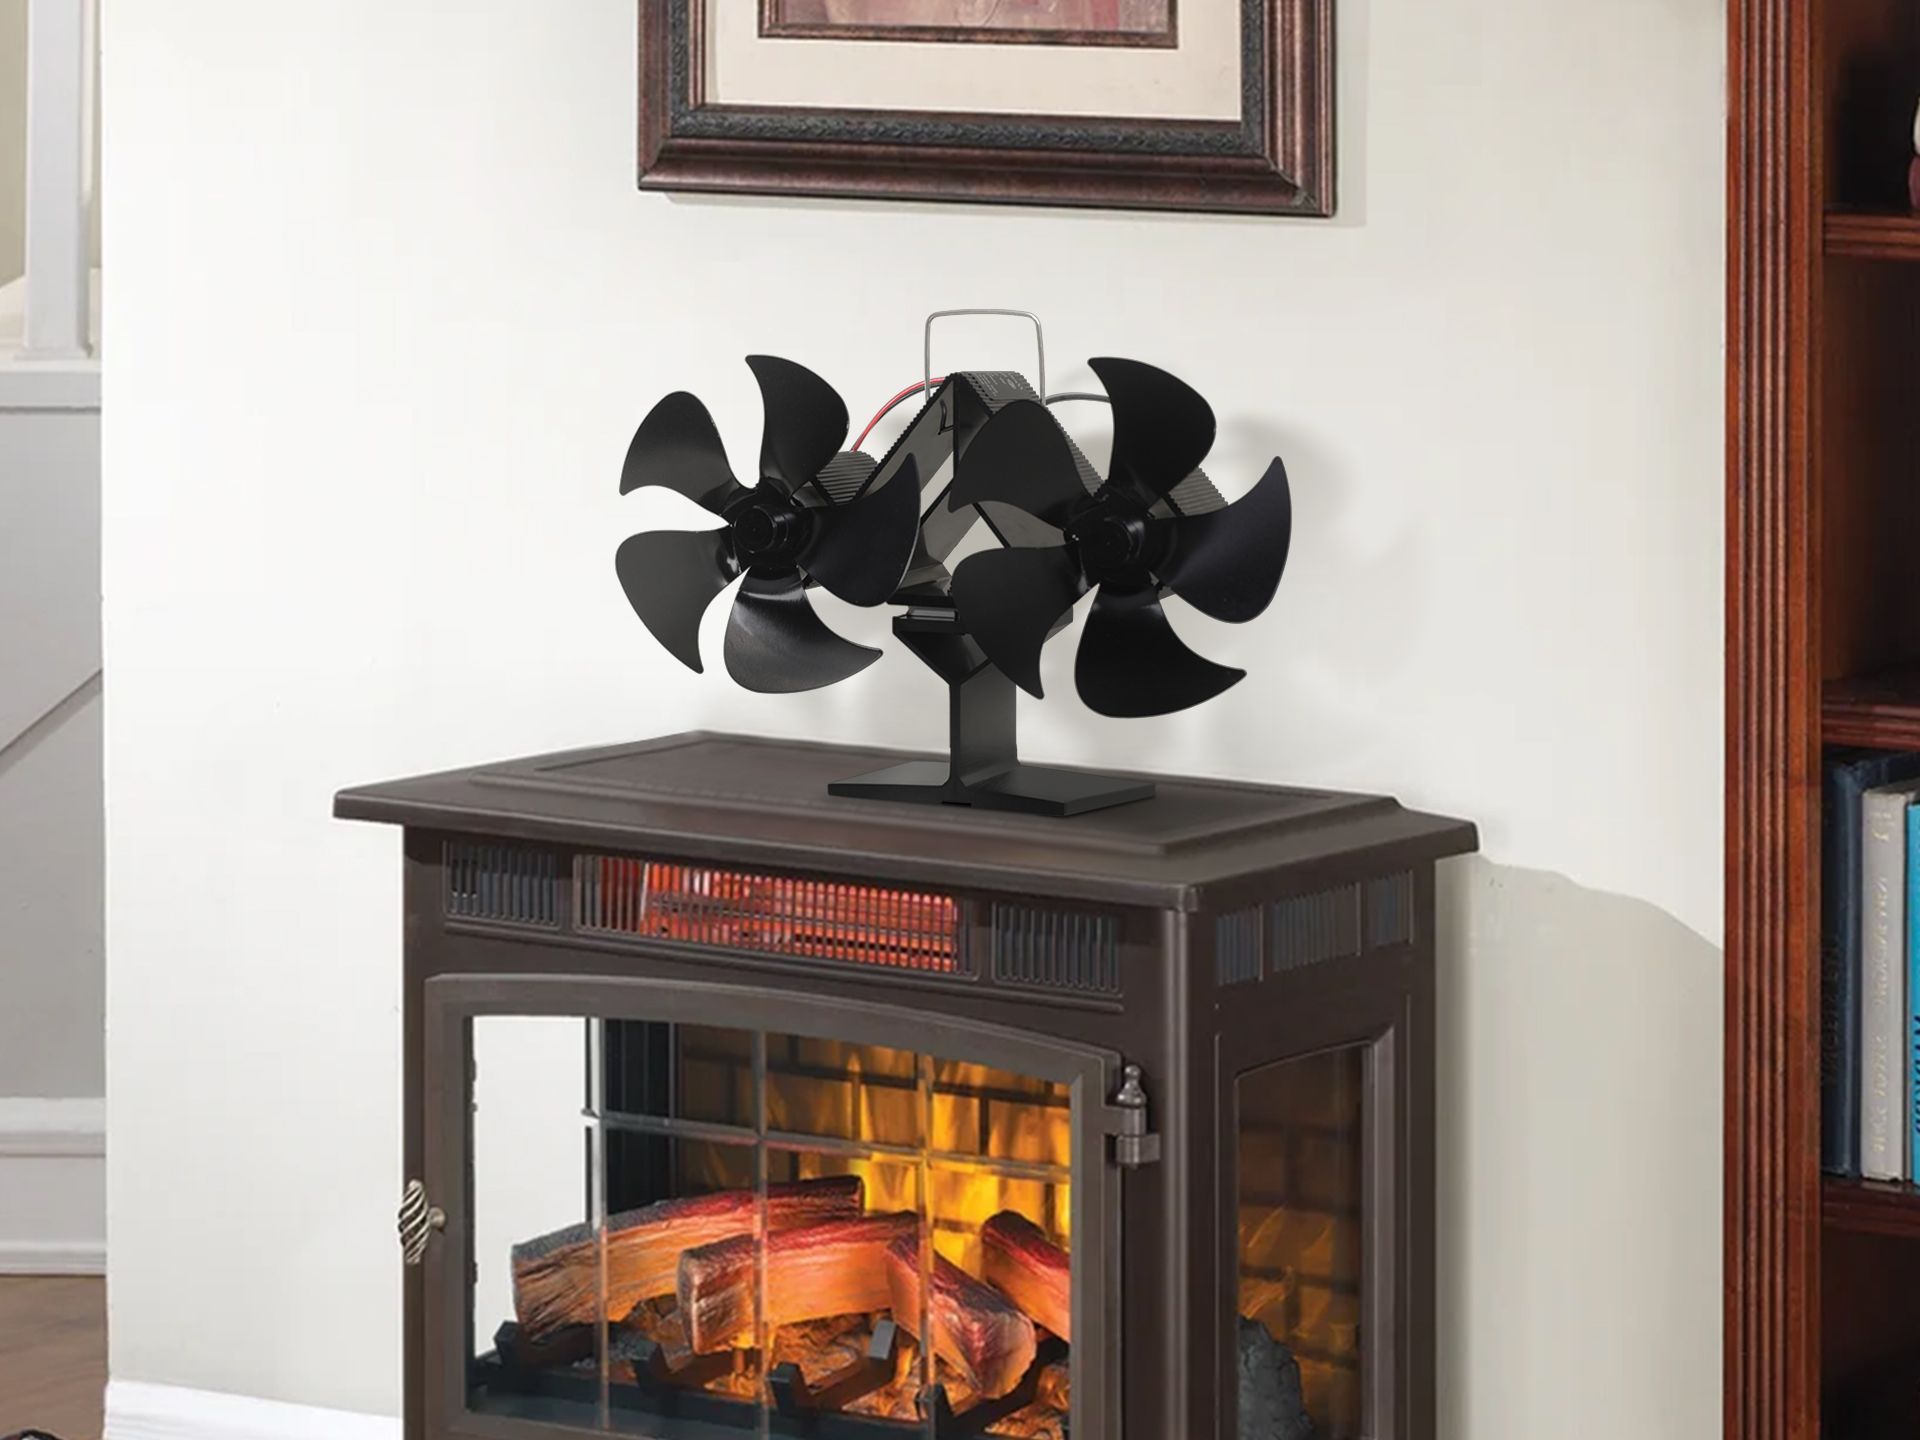 Hastings Home Home-Complete Black Wood Stove Fan in the Wood & Pellet Stove  Accessories department at